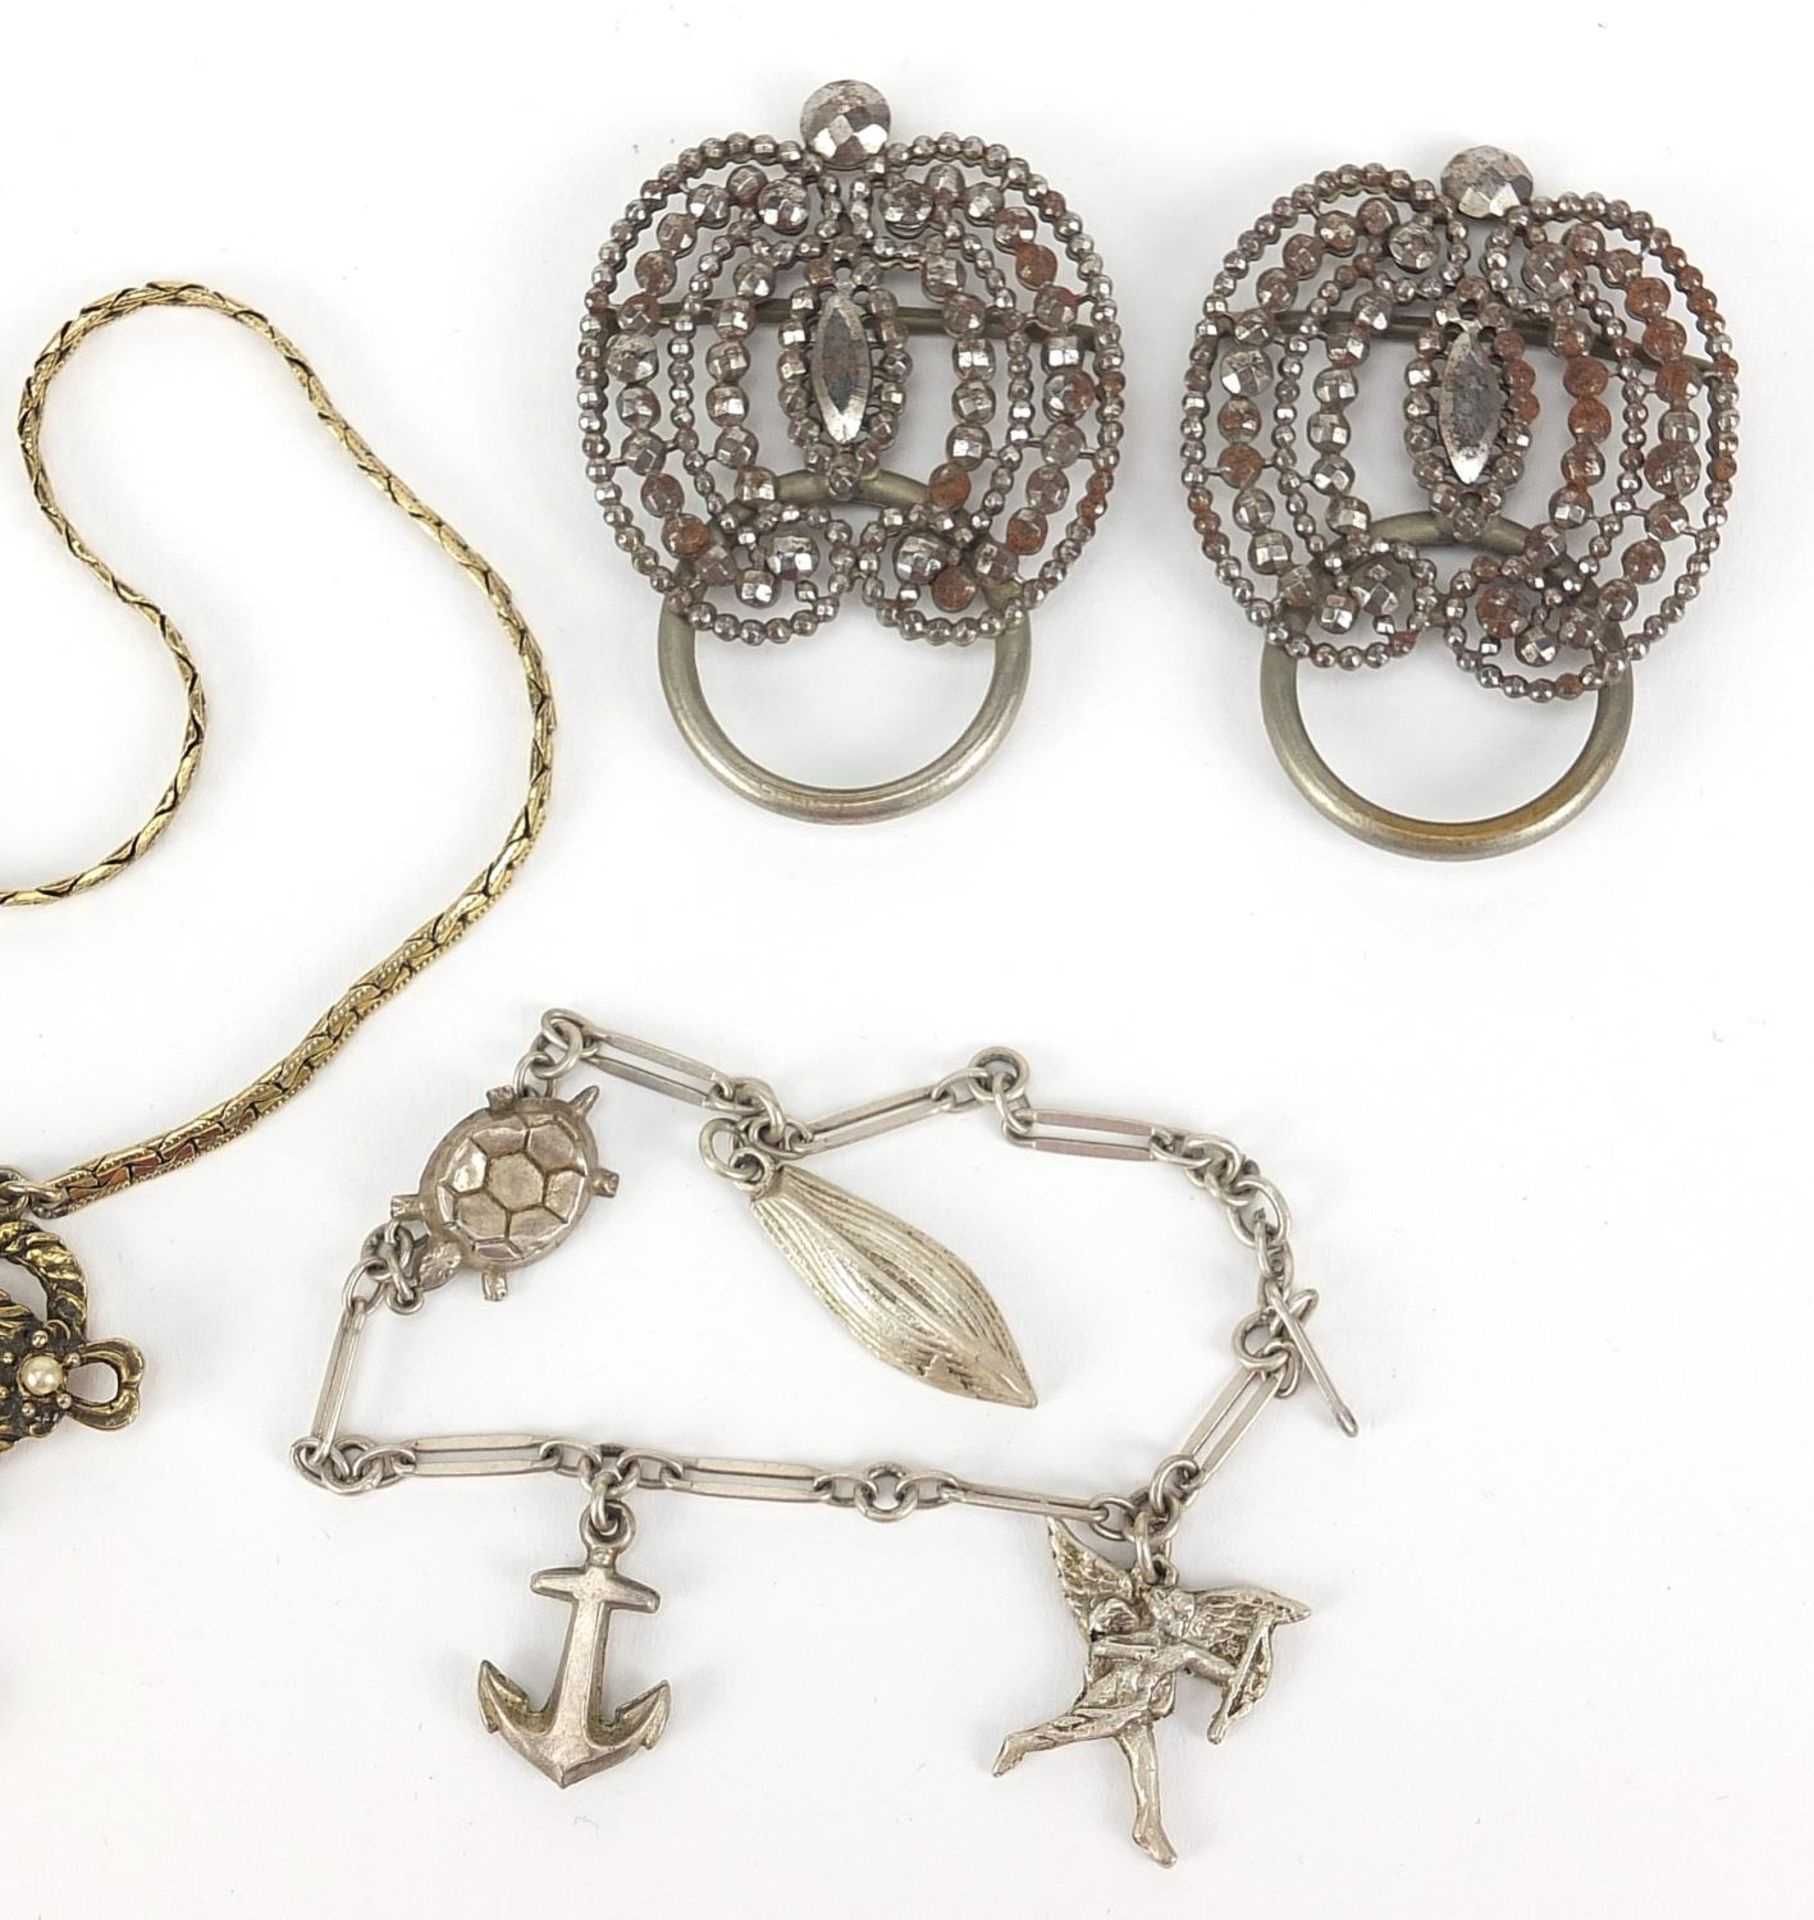 Antique and later jewellery including cut steel, silver charm bracelet, 1887 coin brooch and a large - Image 3 of 4